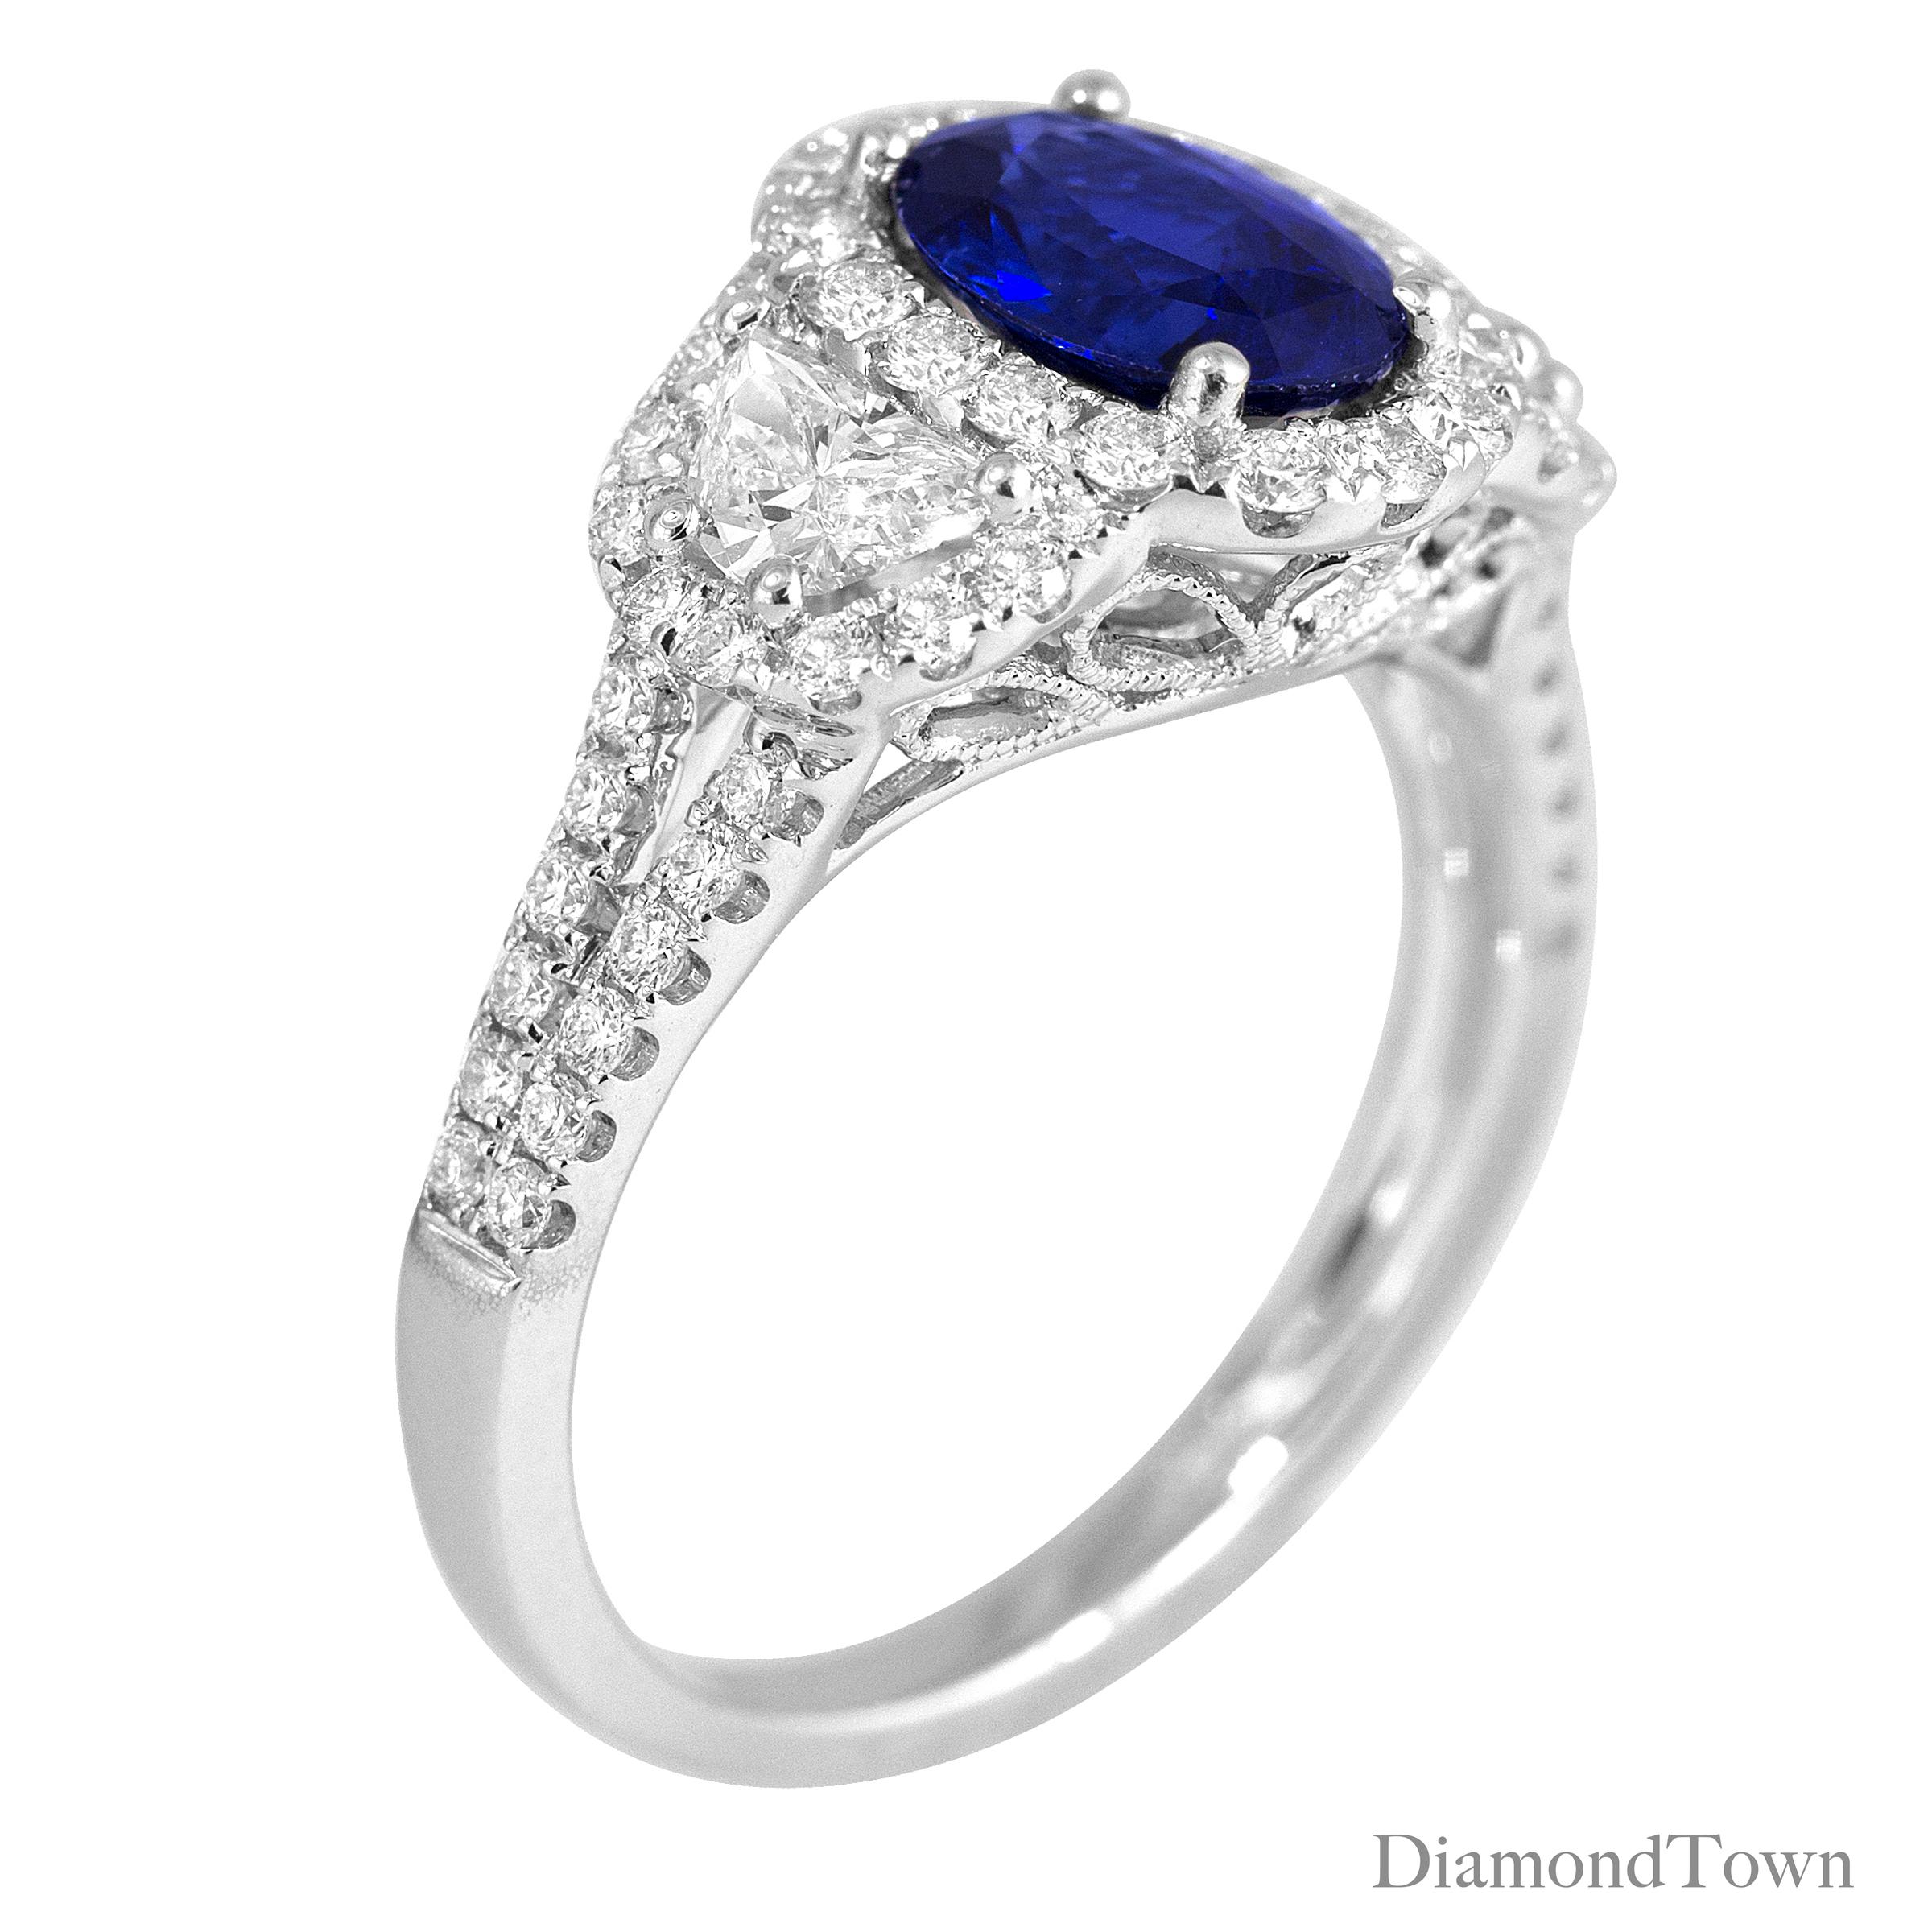 (DiamondTown) This gorgeous ring has an Oval Cut Fine Ceylon Sapphire center measuring 2.26 carats, flanked by two half-moon diamonds and surrounded by a halo of round white diamonds. A double row of round diamonds extend down the split